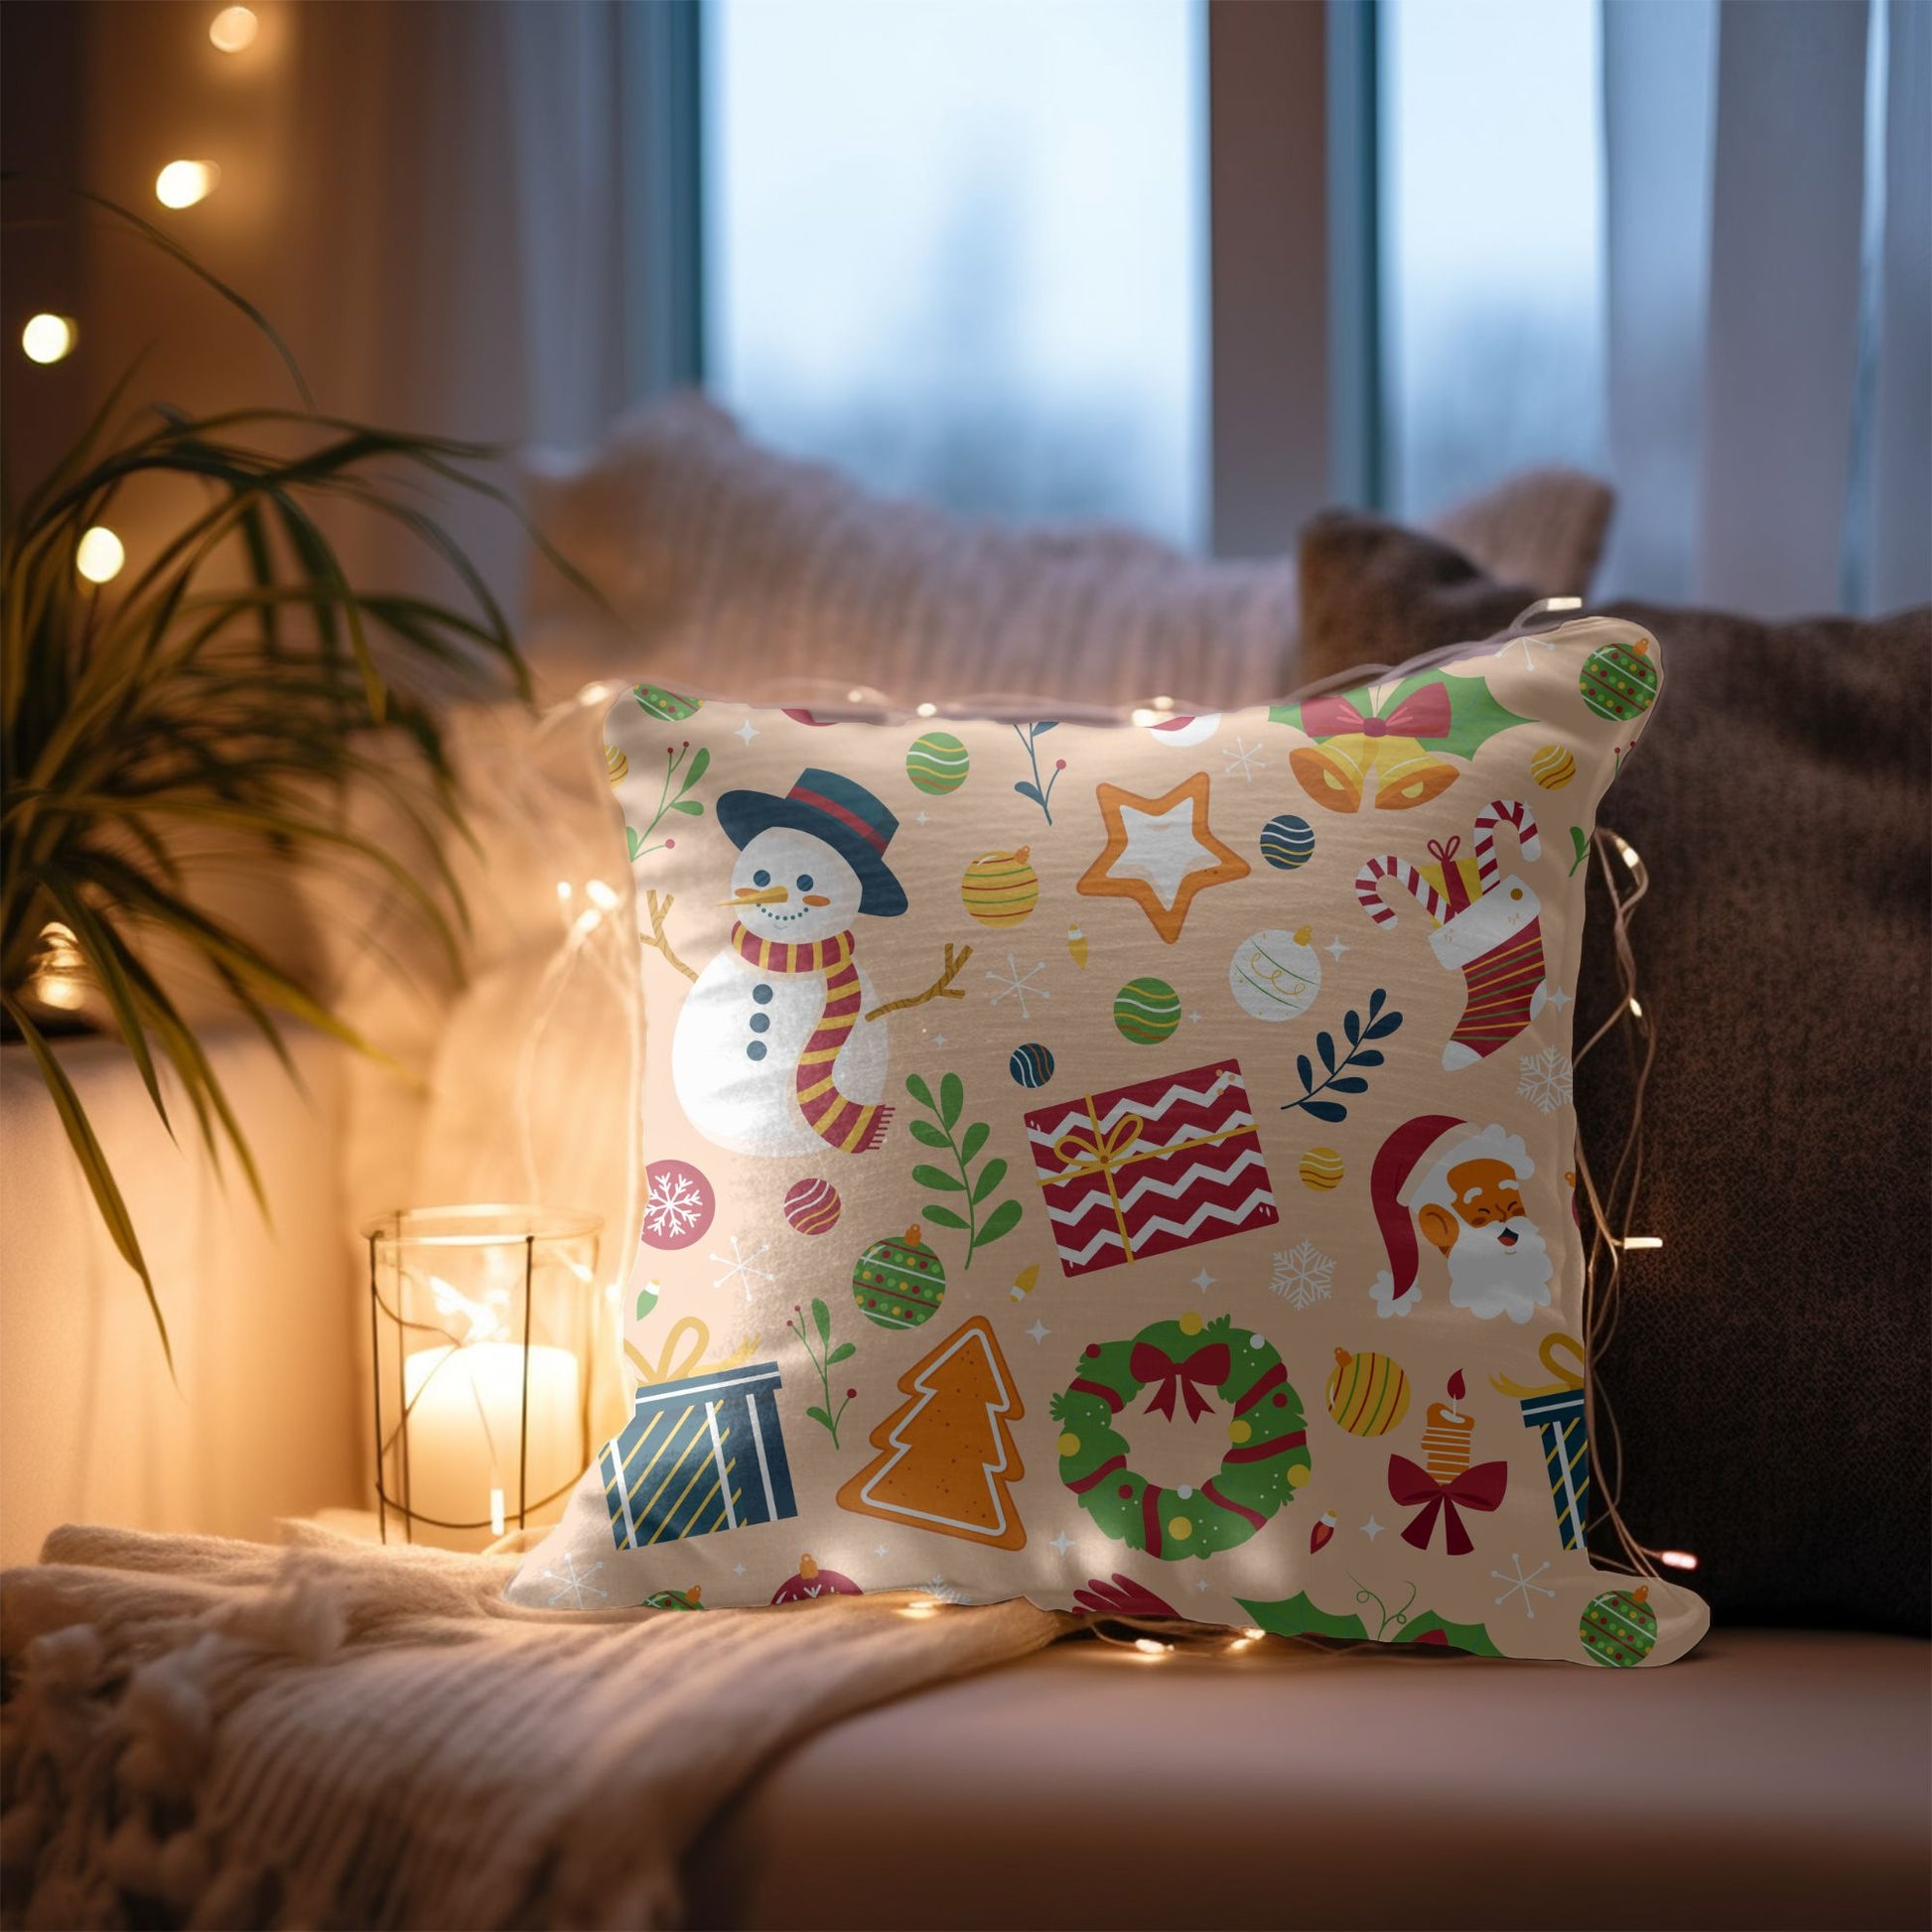 Traditional Holiday Decor Pillow with Plaid Design